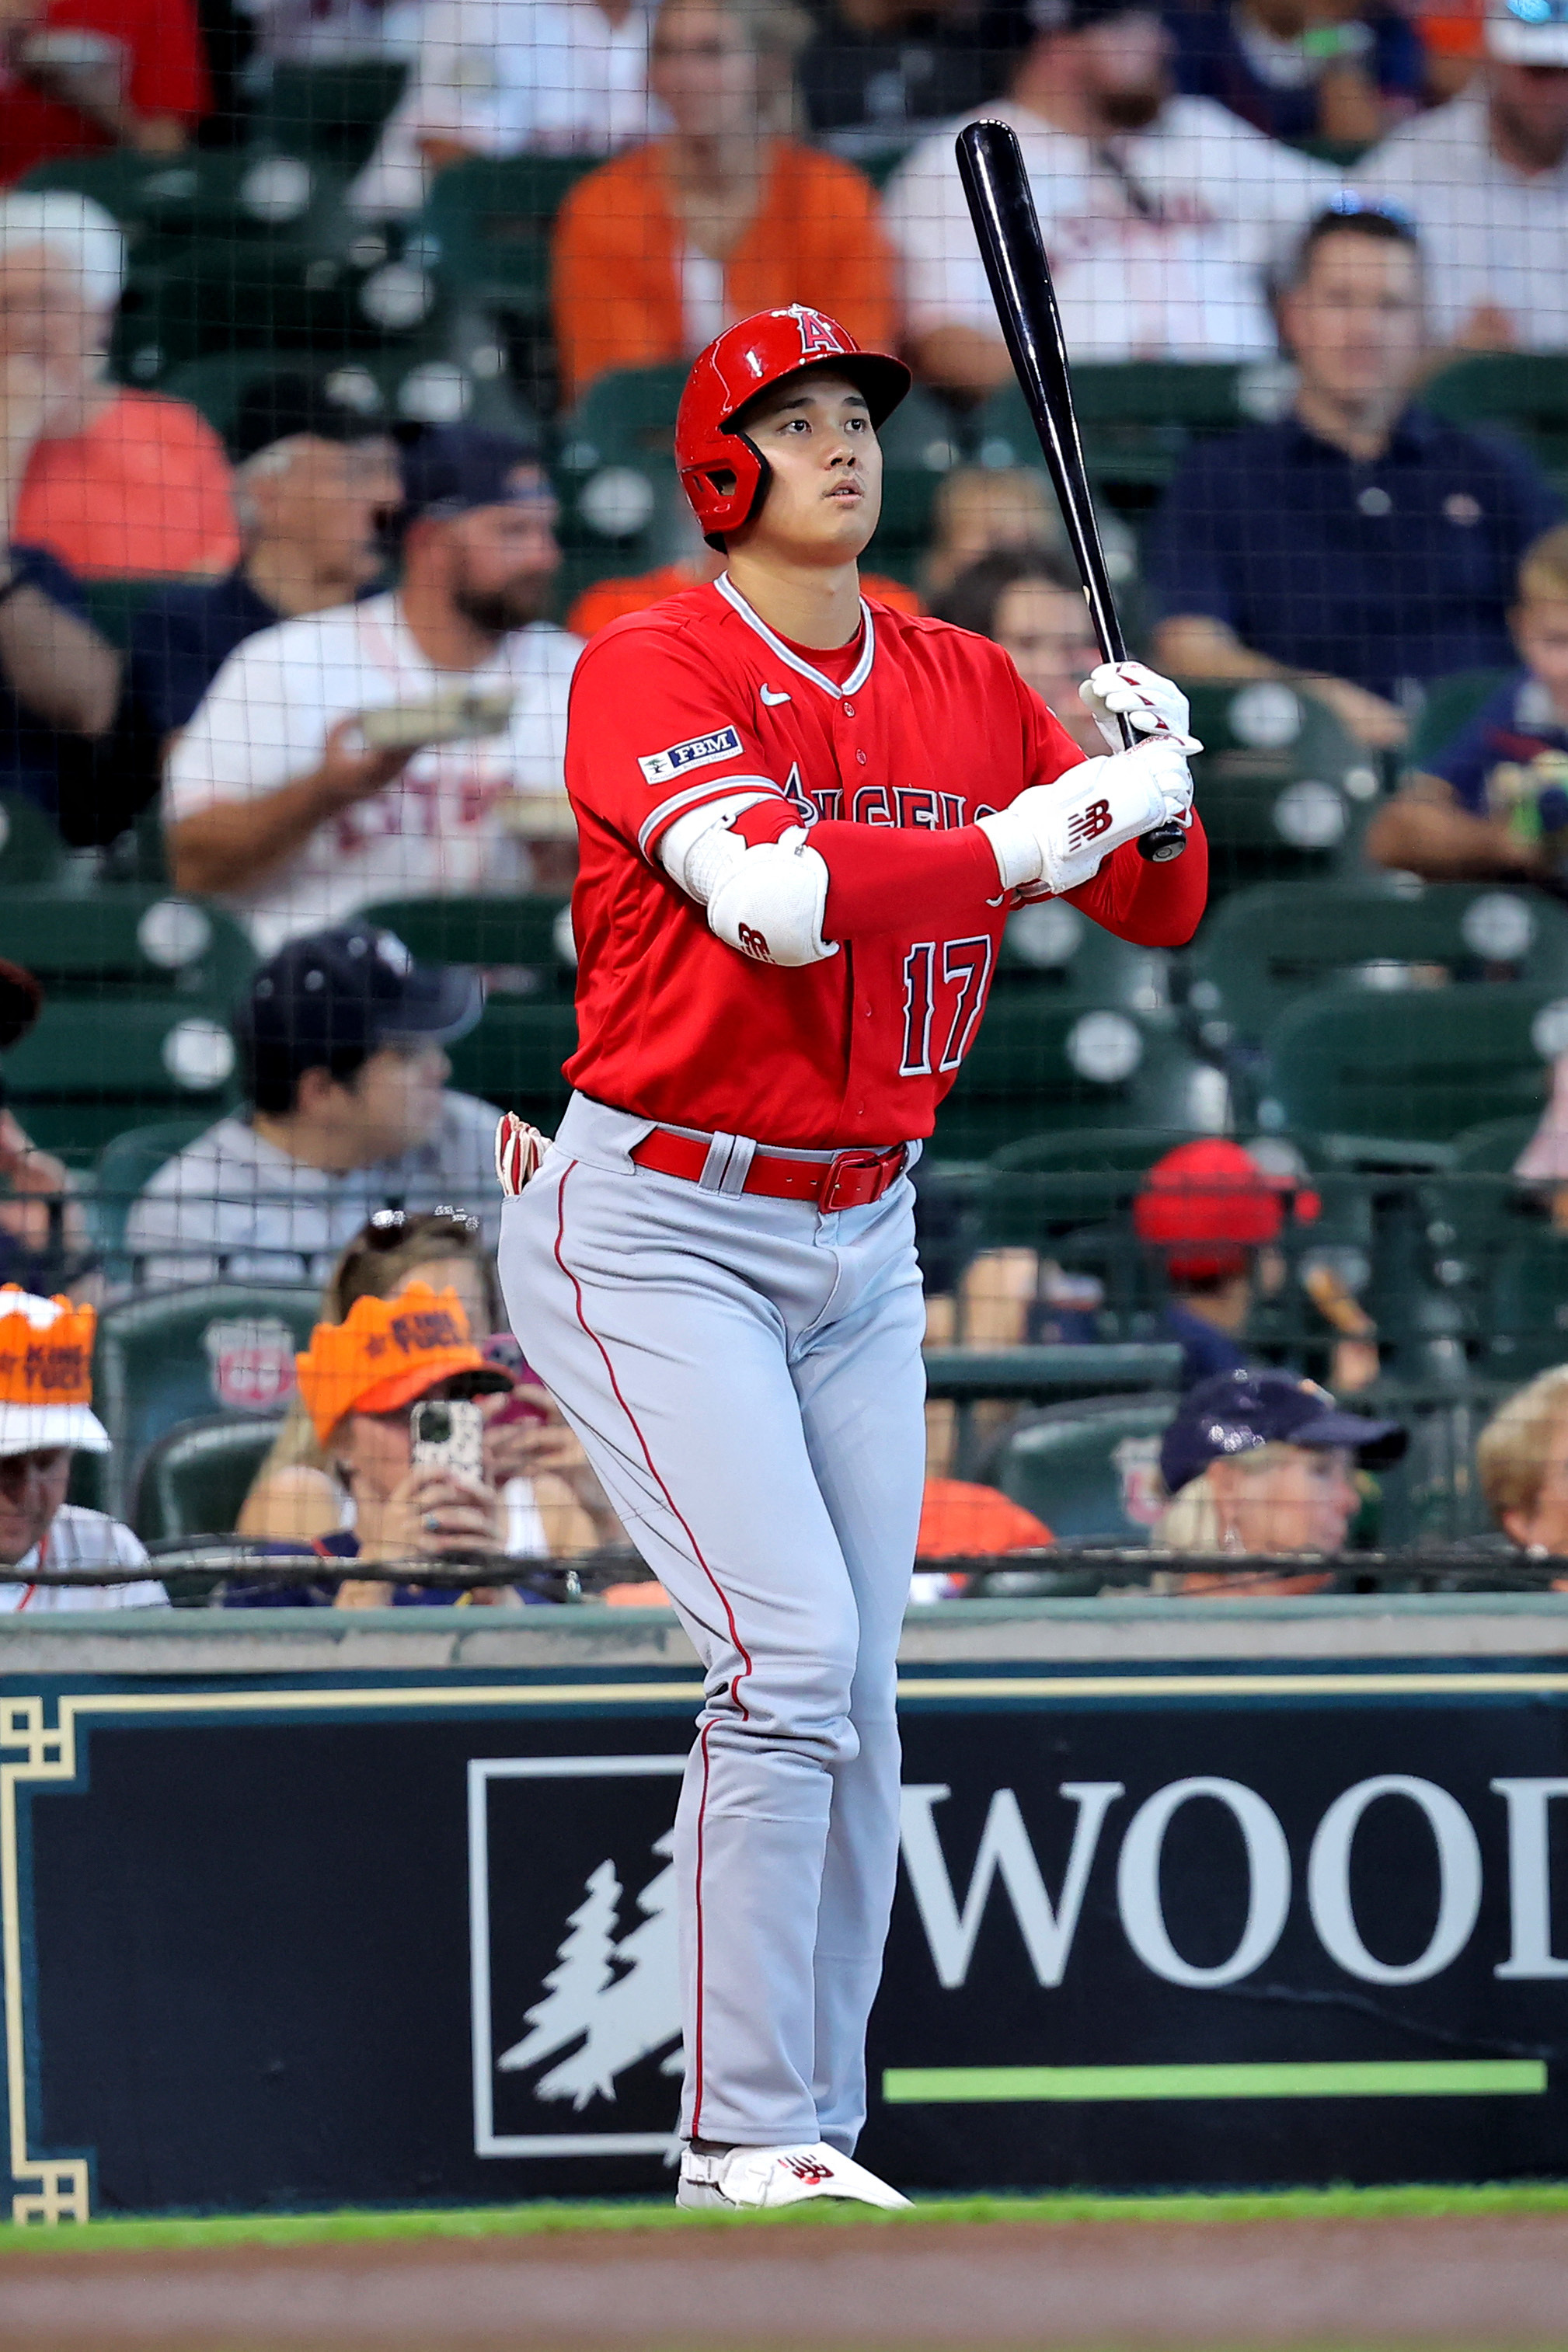 Shohei Ohtani (41st HR), Chase Silseth guide Angels past Astros